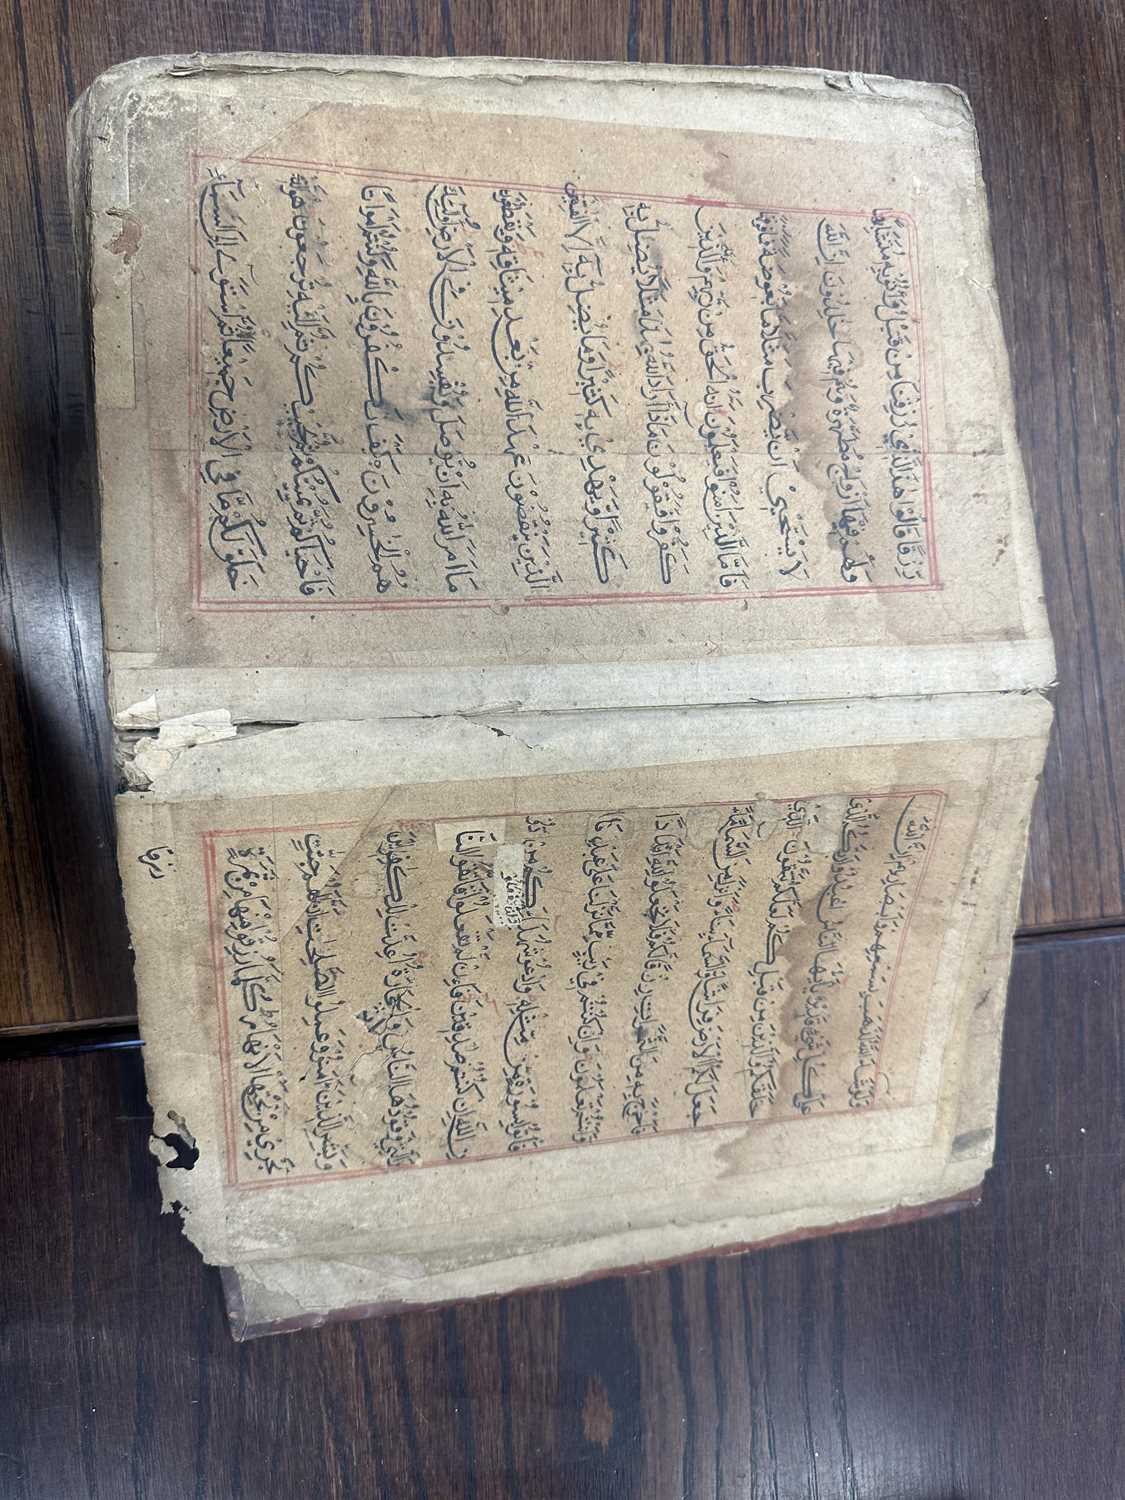 AN EARLY COPY OF THE KORAN LEATHER BOUND BOOK - Image 8 of 44